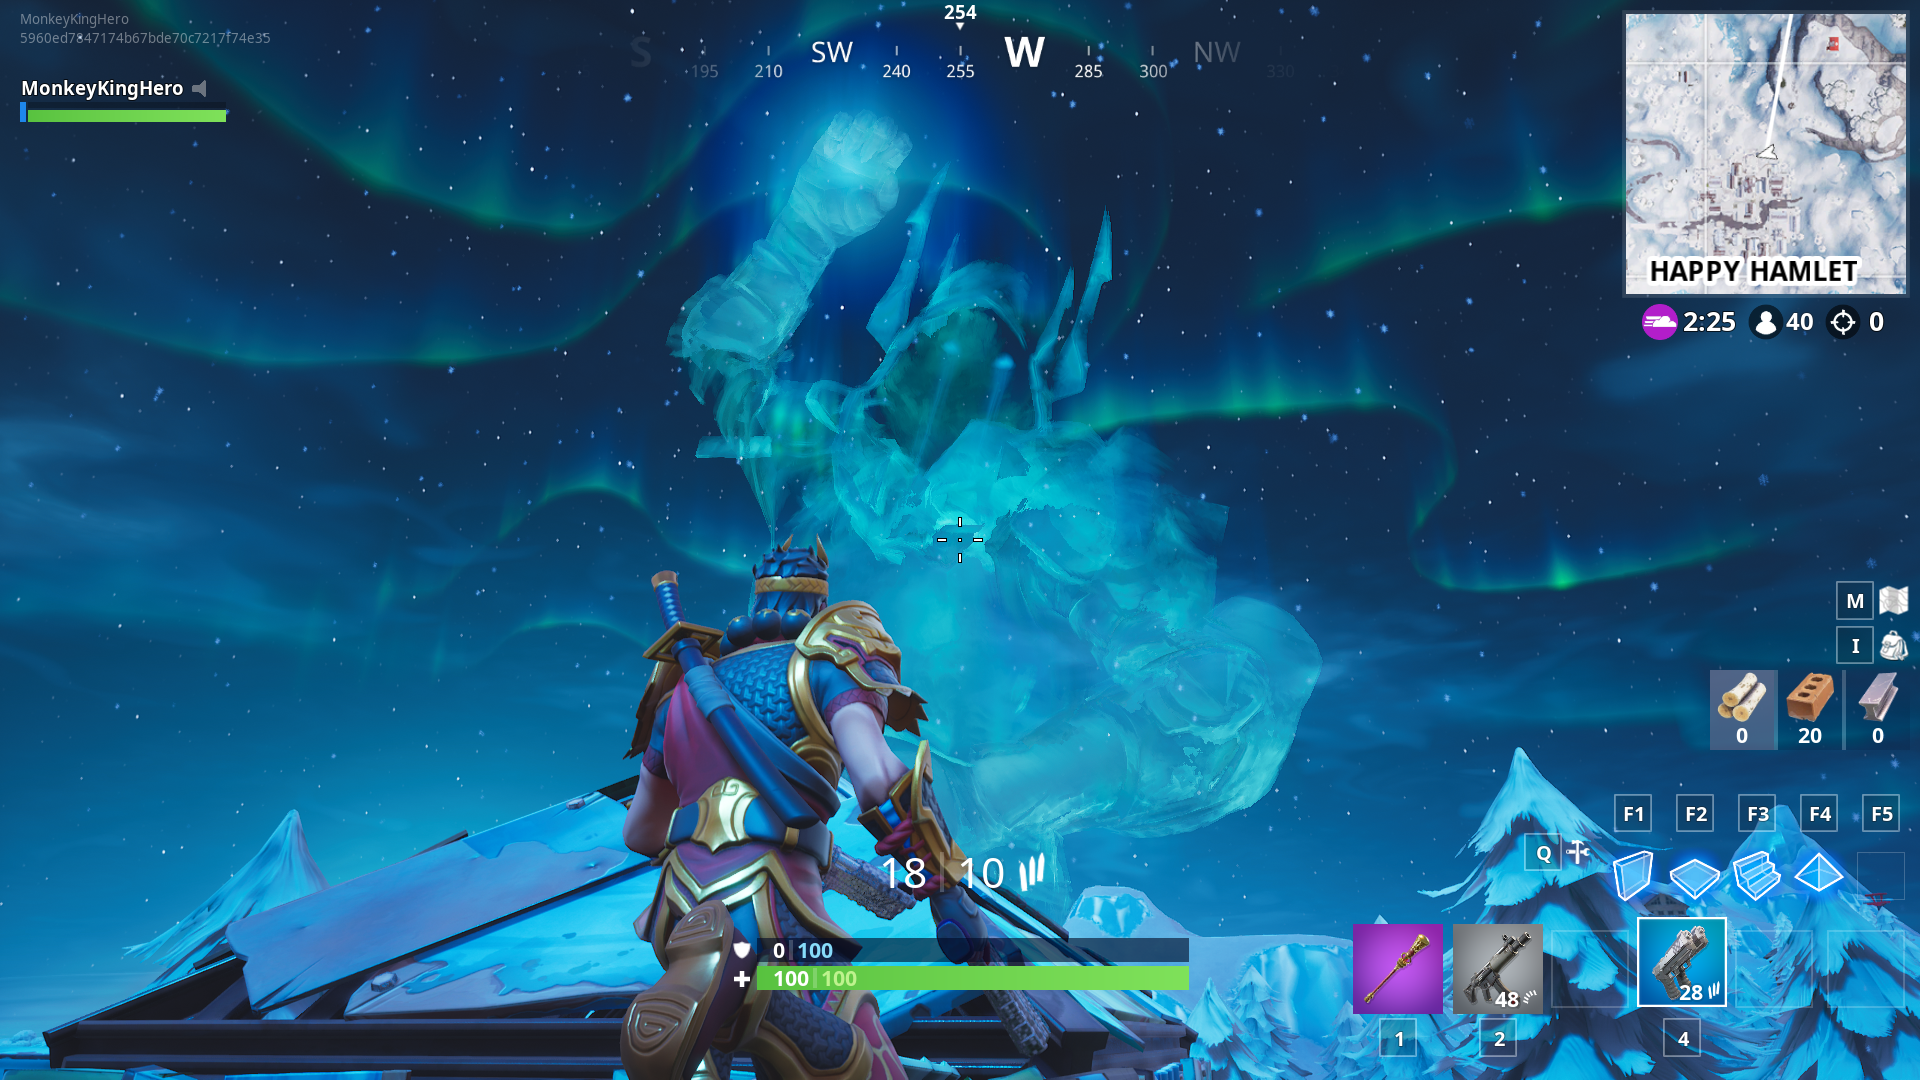 giant ice king covers the entire map with snow brings back zombies in fortnite ice storm event - fortnite cube zombies